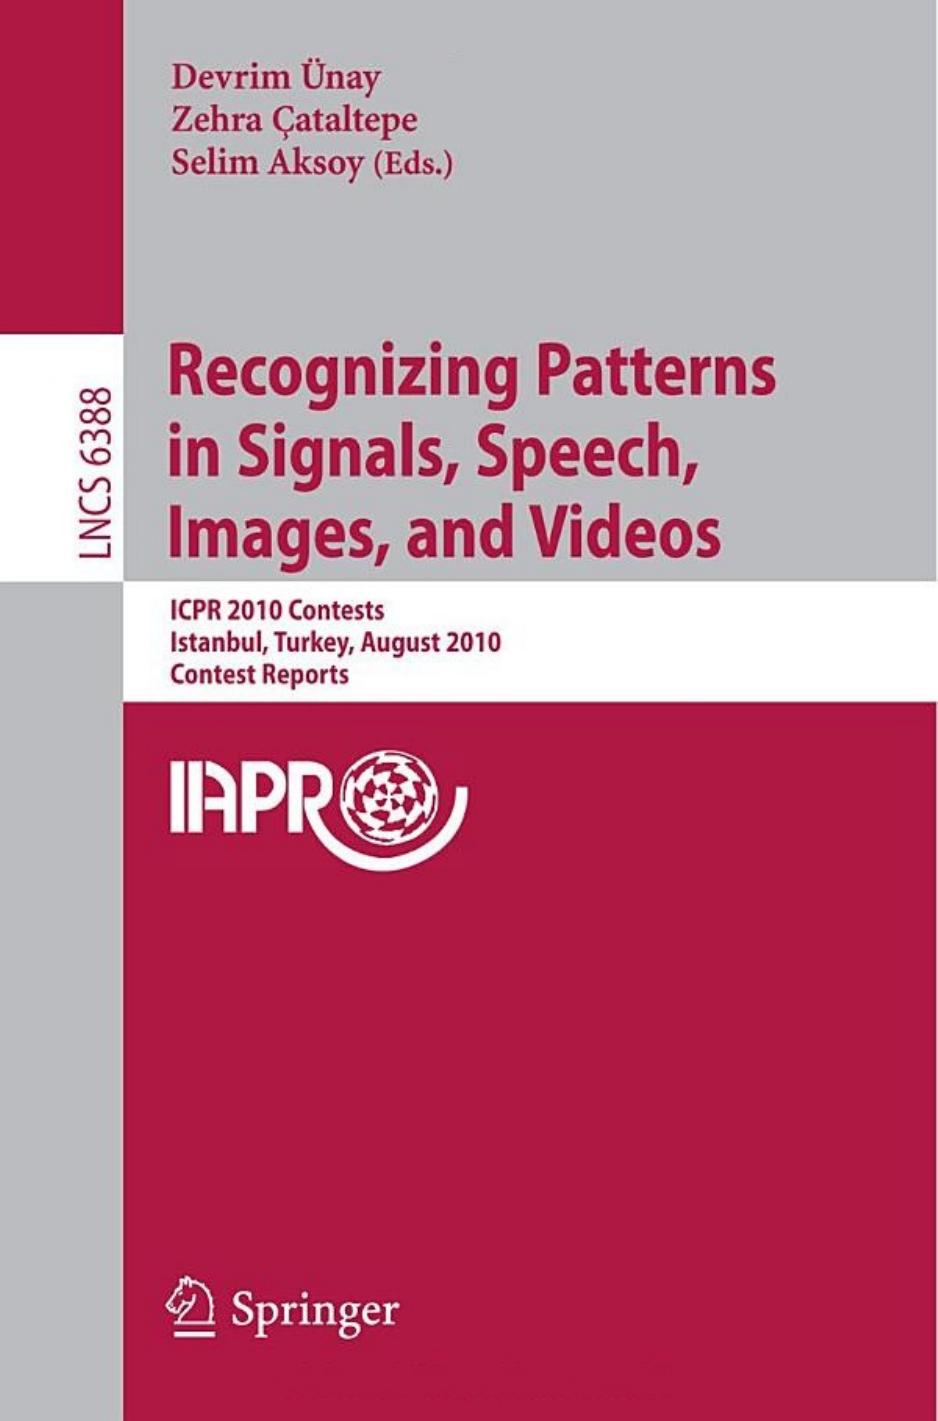 Recognizing Patterns in Signals, Speech, Images, and Videos: ICPR 2010 Contents, Istanbul, Turkey, August 23-26, 2010, Contest Reports